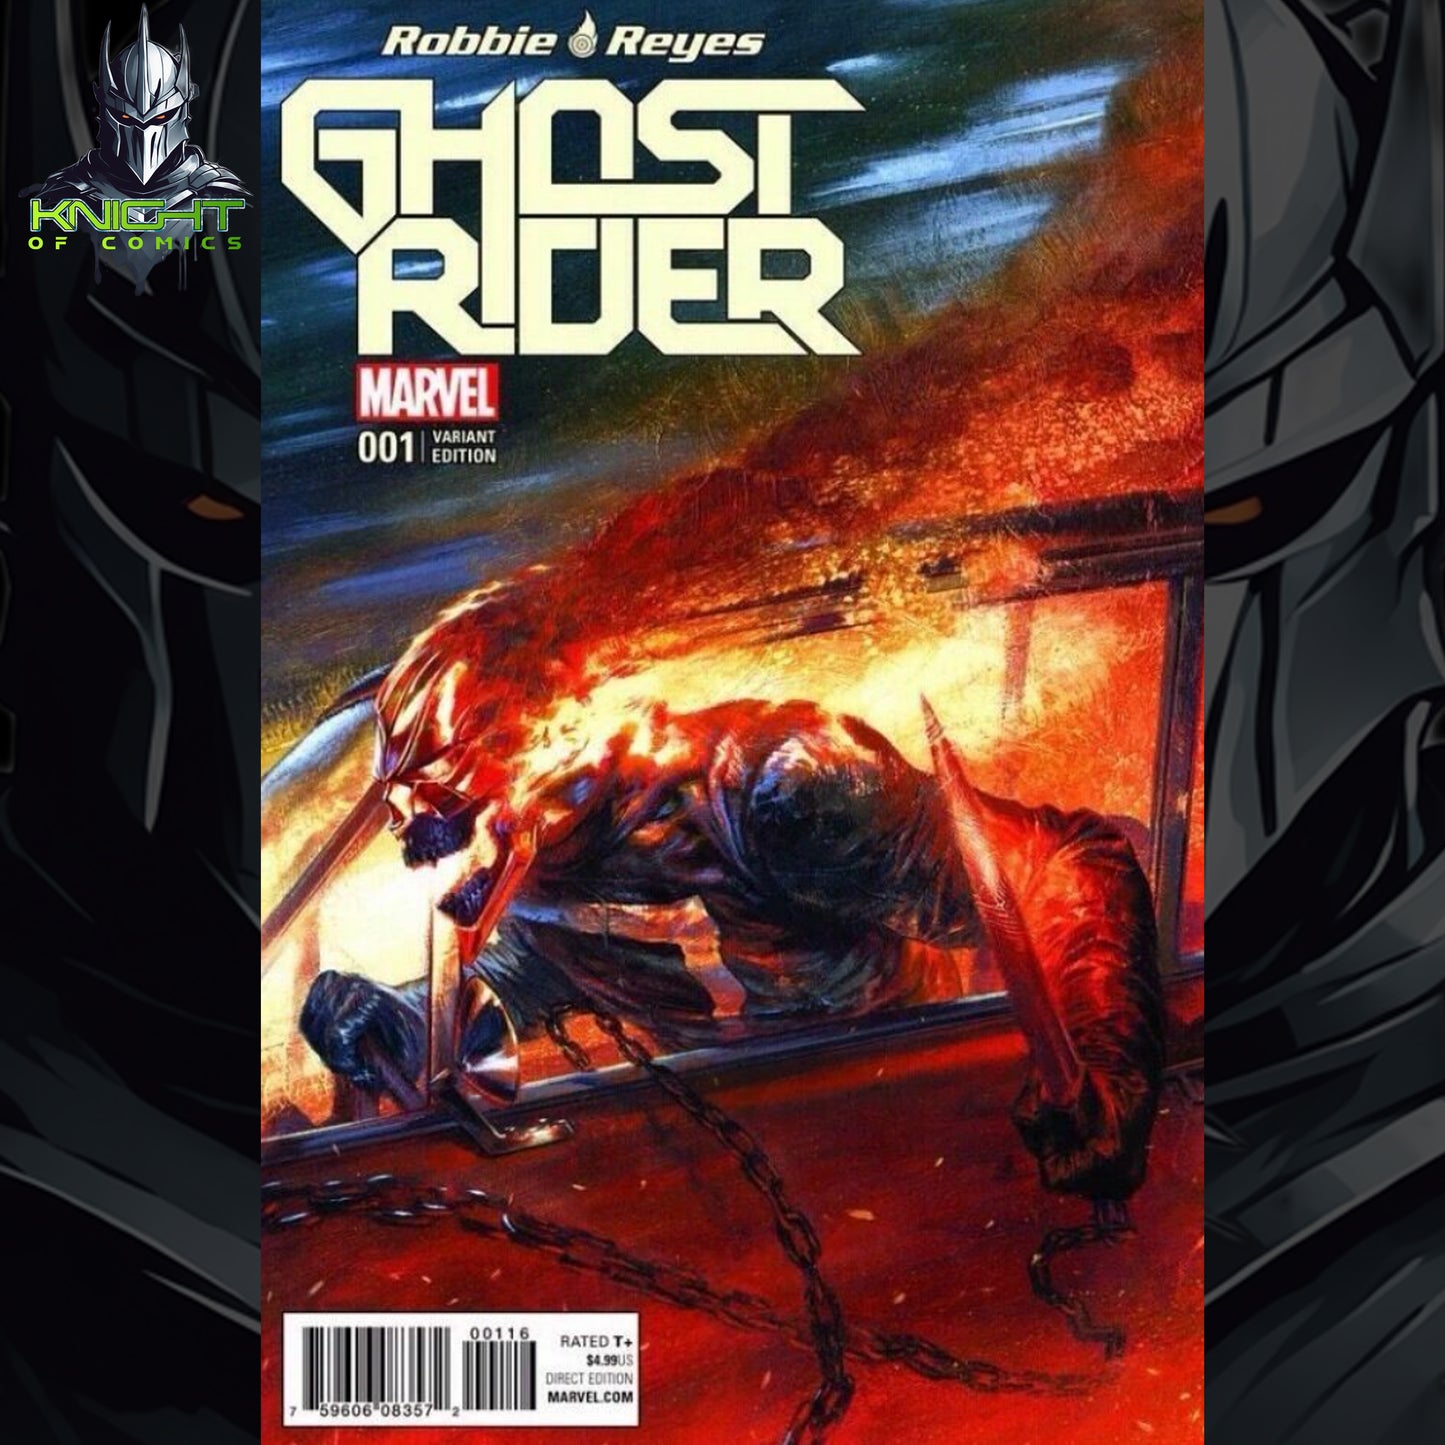 GHOST RIDER #1 - GABRIELE DELL'OTTO TRADE VARIANT EXCLUSIVE COLOR NM+